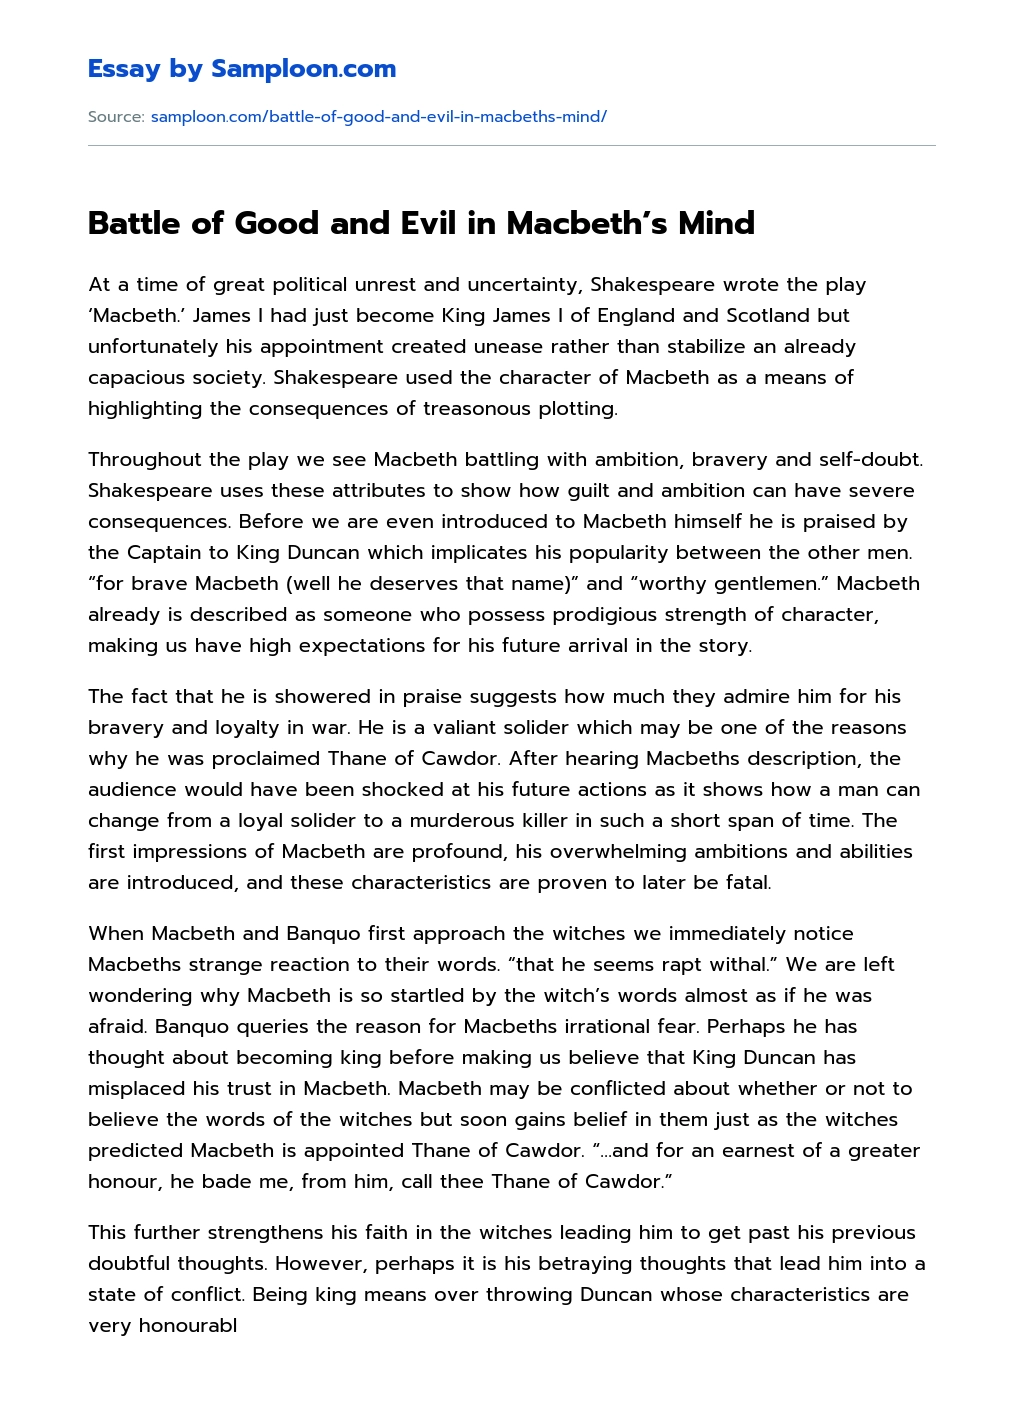 Battle of Good and Evil in Macbeth’s Mind essay